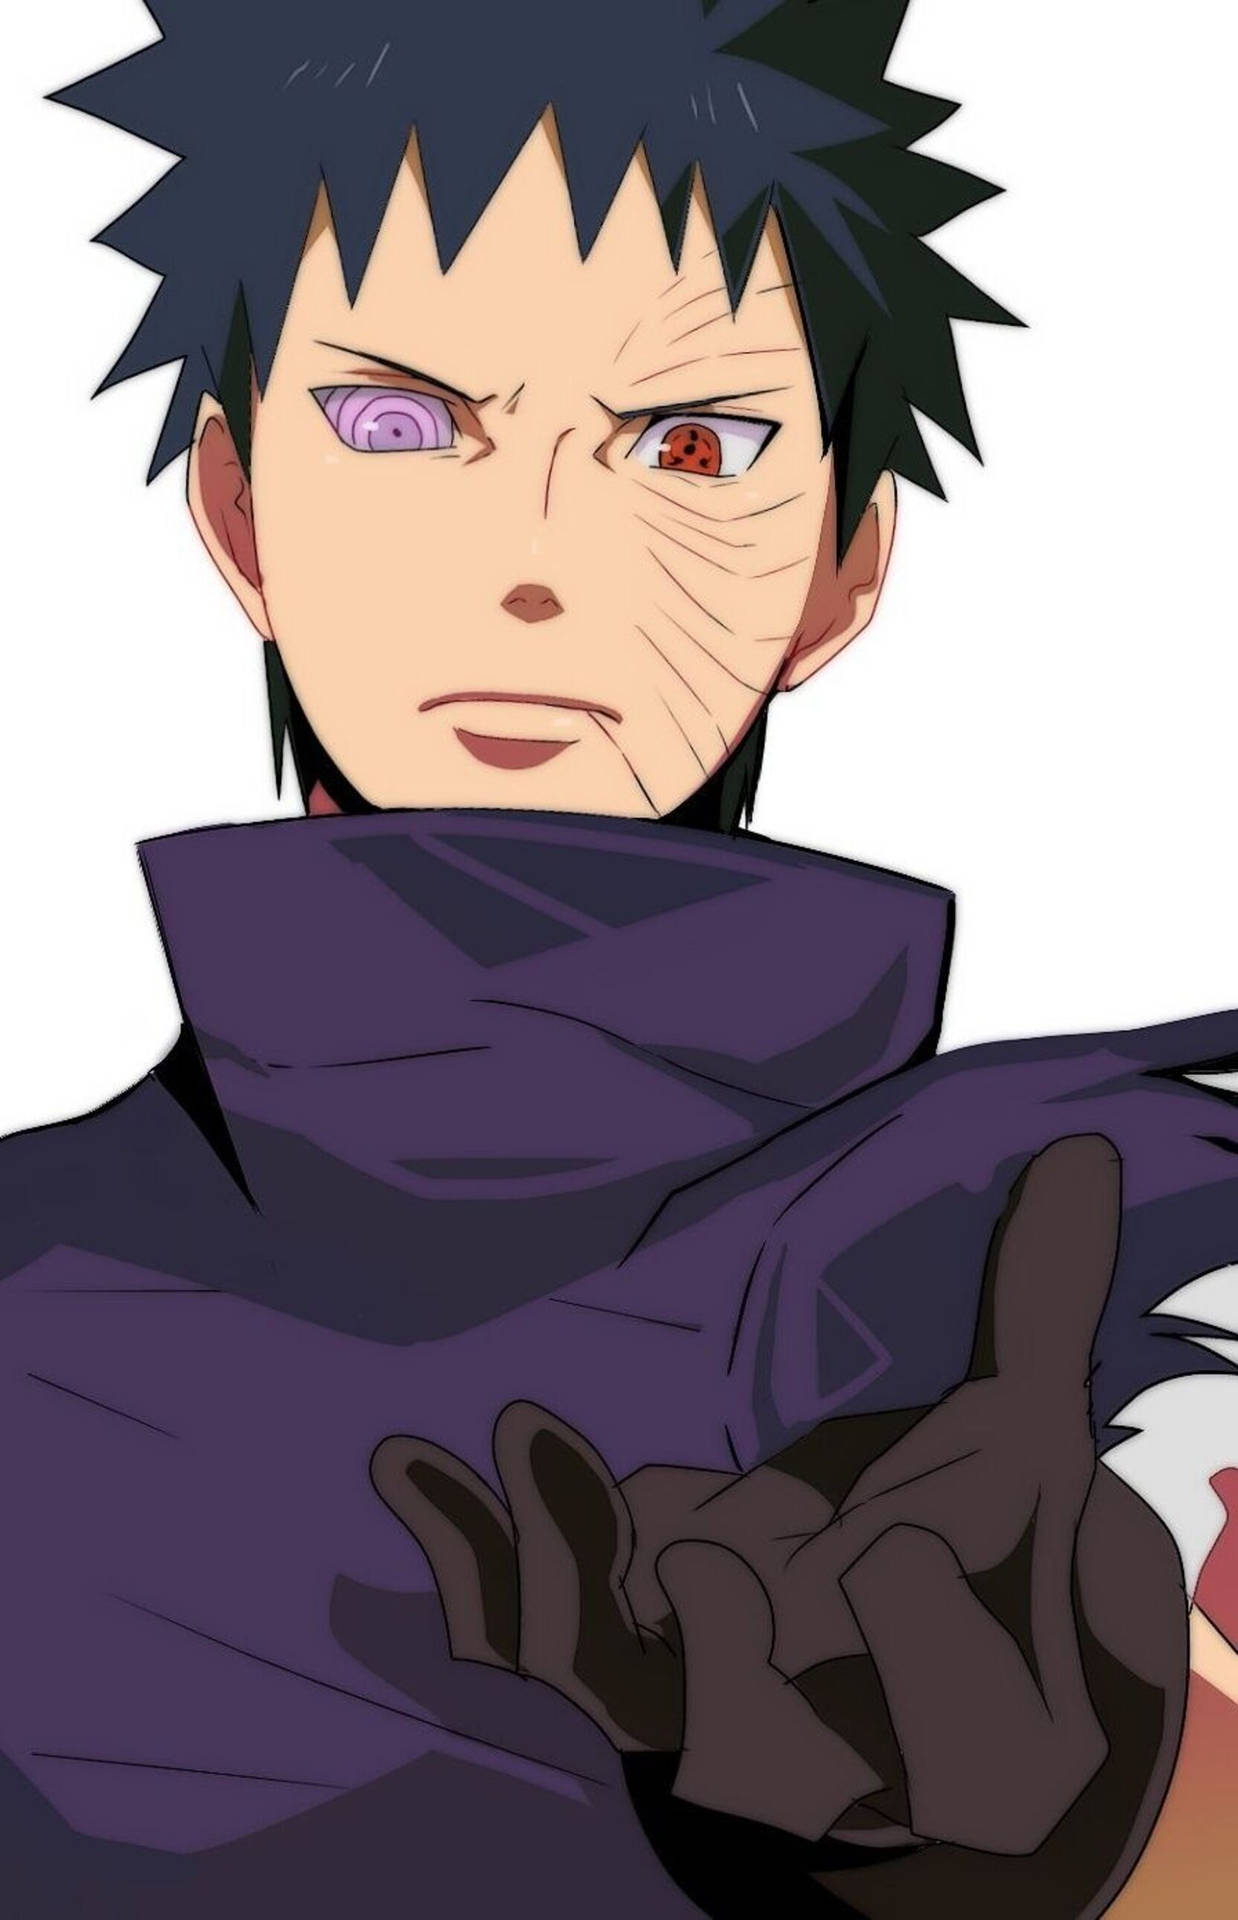 Show Your Anime Love With Obito Uchiha! Background